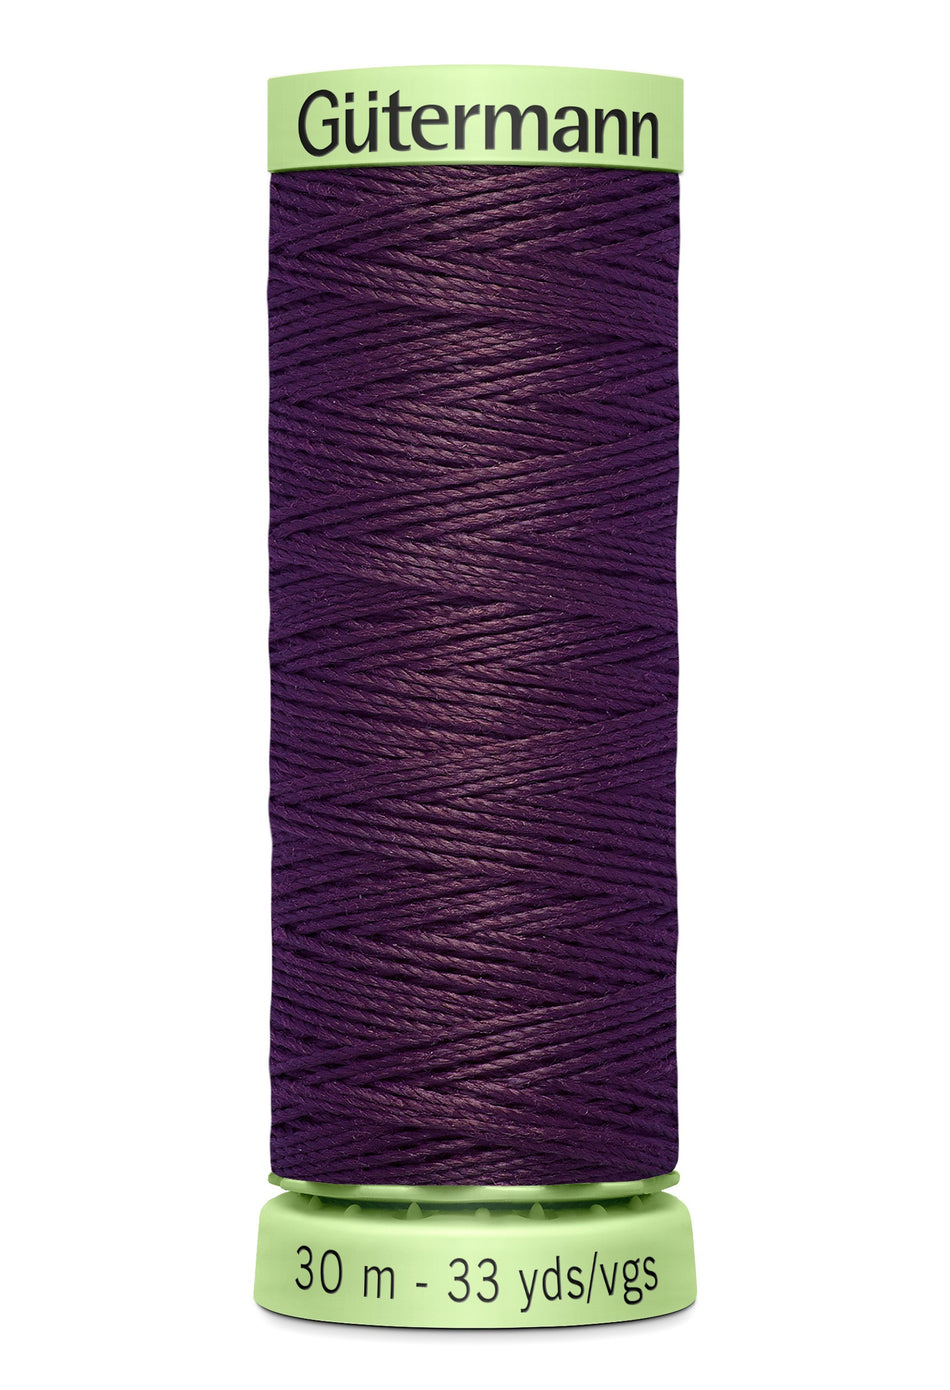 Gutermann Top Stitch Polyester 447 Mulberry 30m/33yd Spool